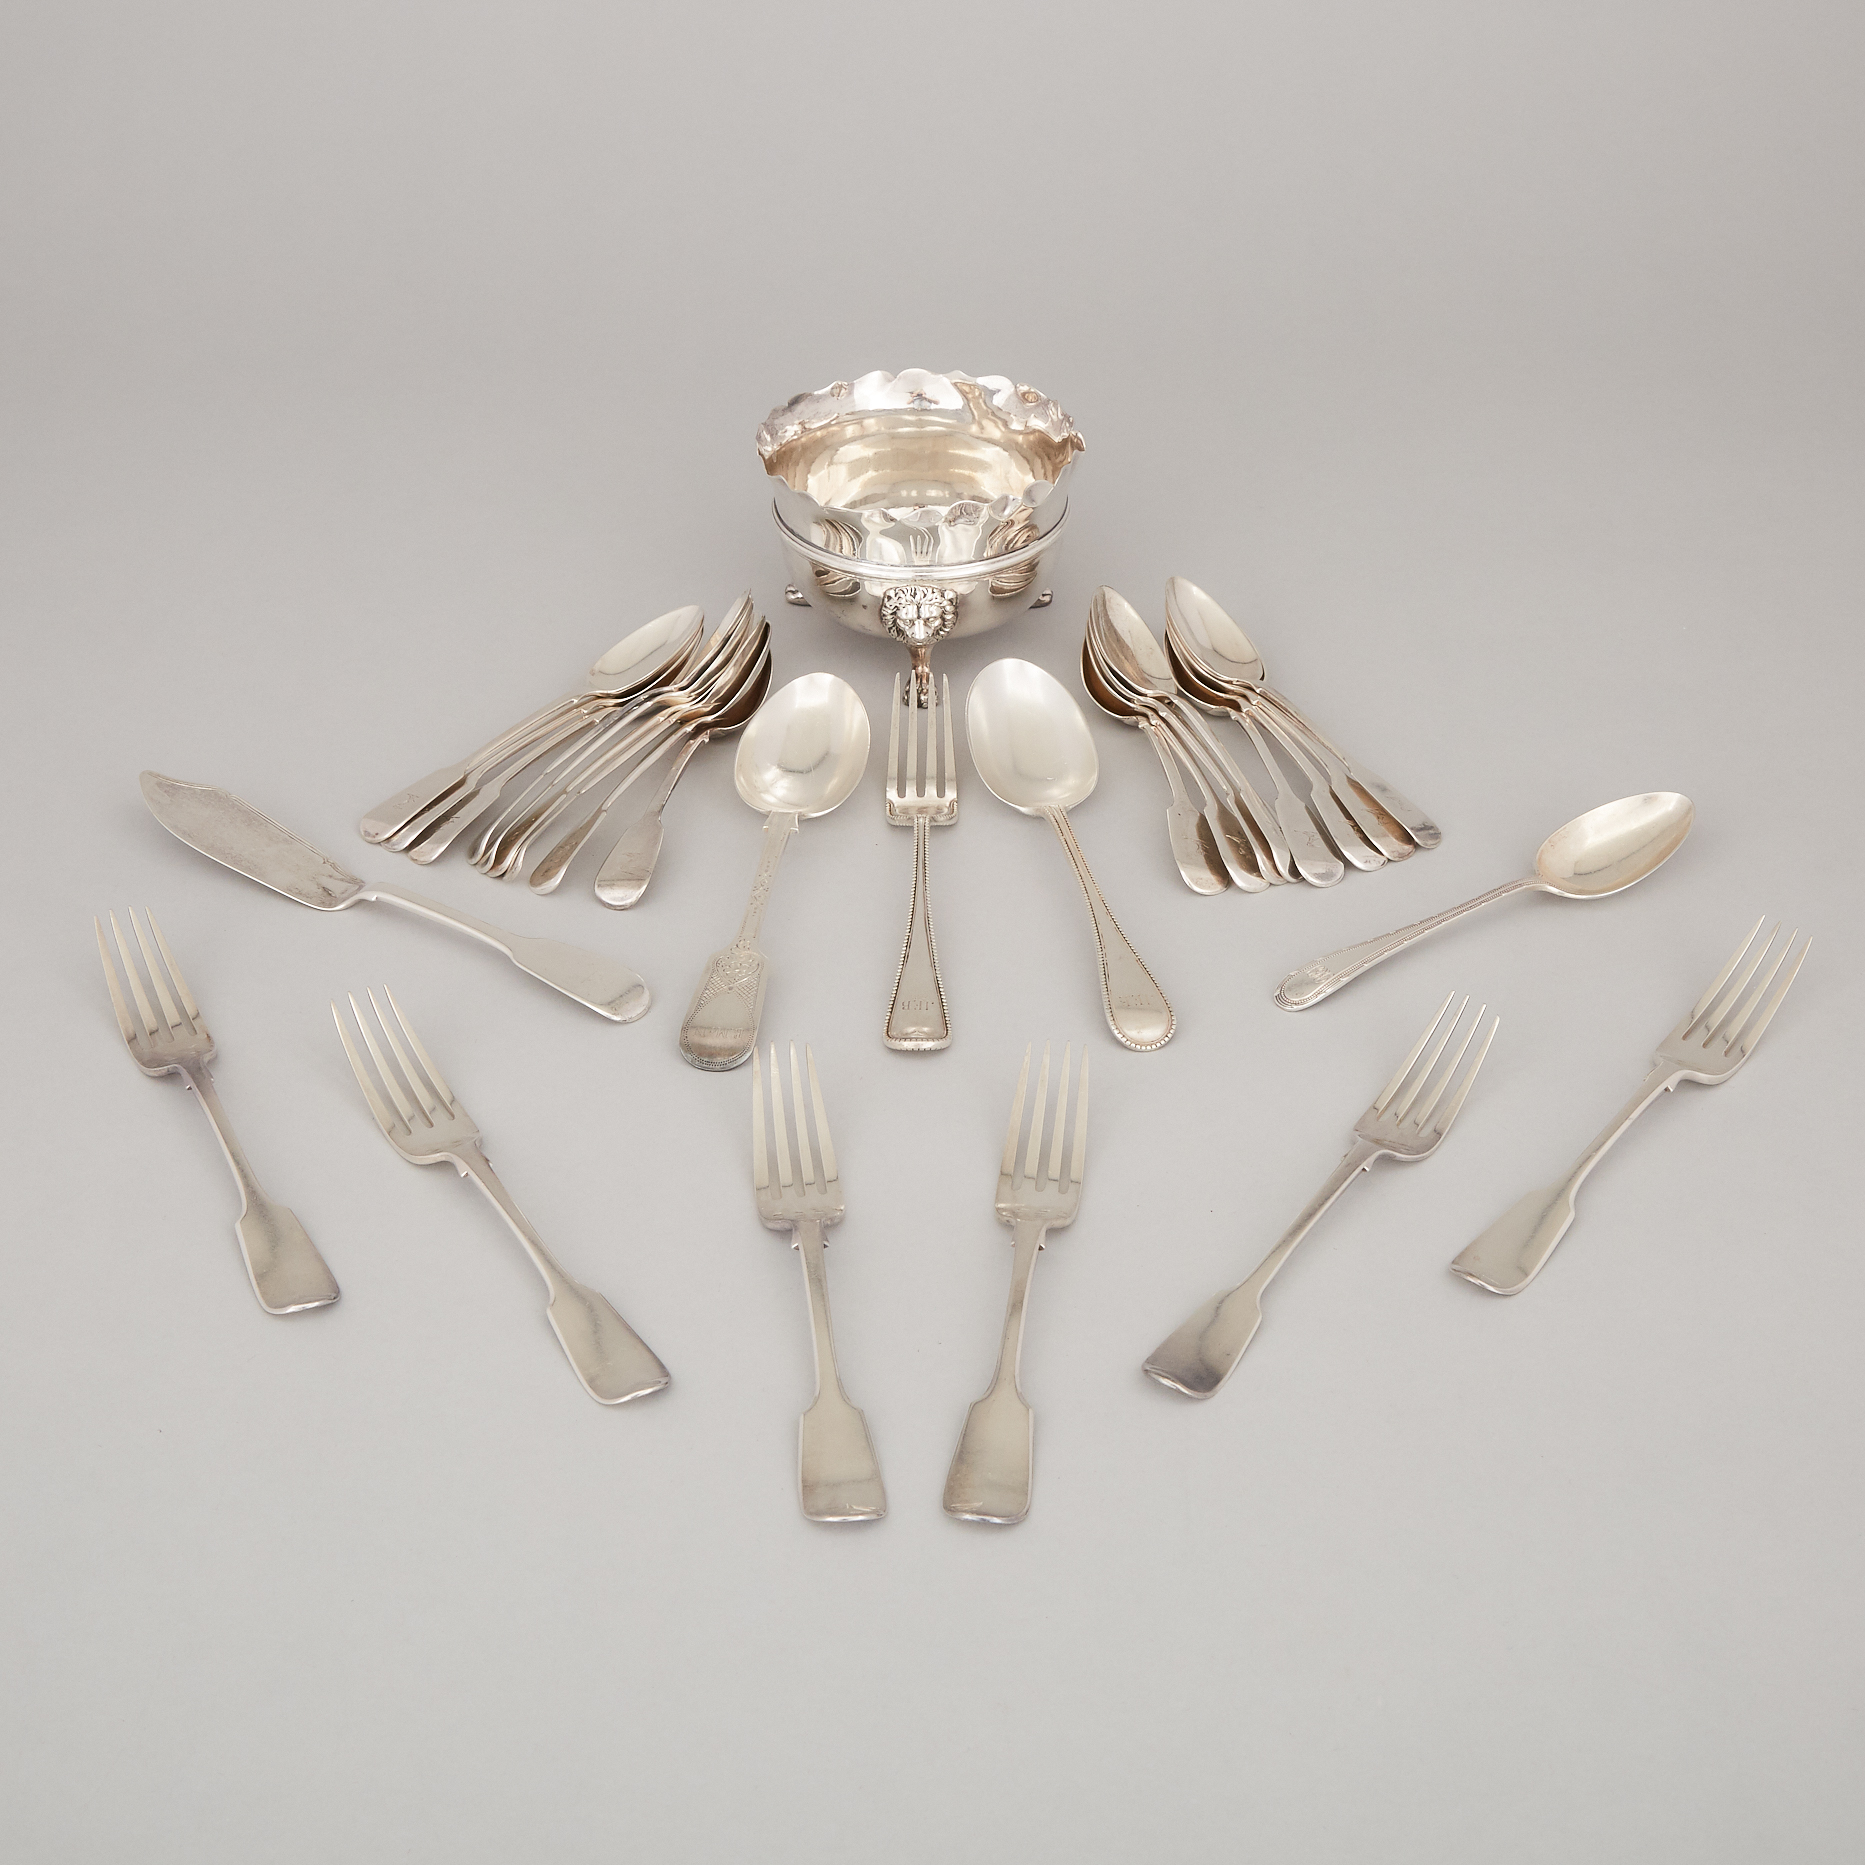 Edwardian Silver Small Bowl, Edward Barnard & Sons, London, 1908, and Twenty-Eight Pieces of Mainly Victorian Flatware, 19th century